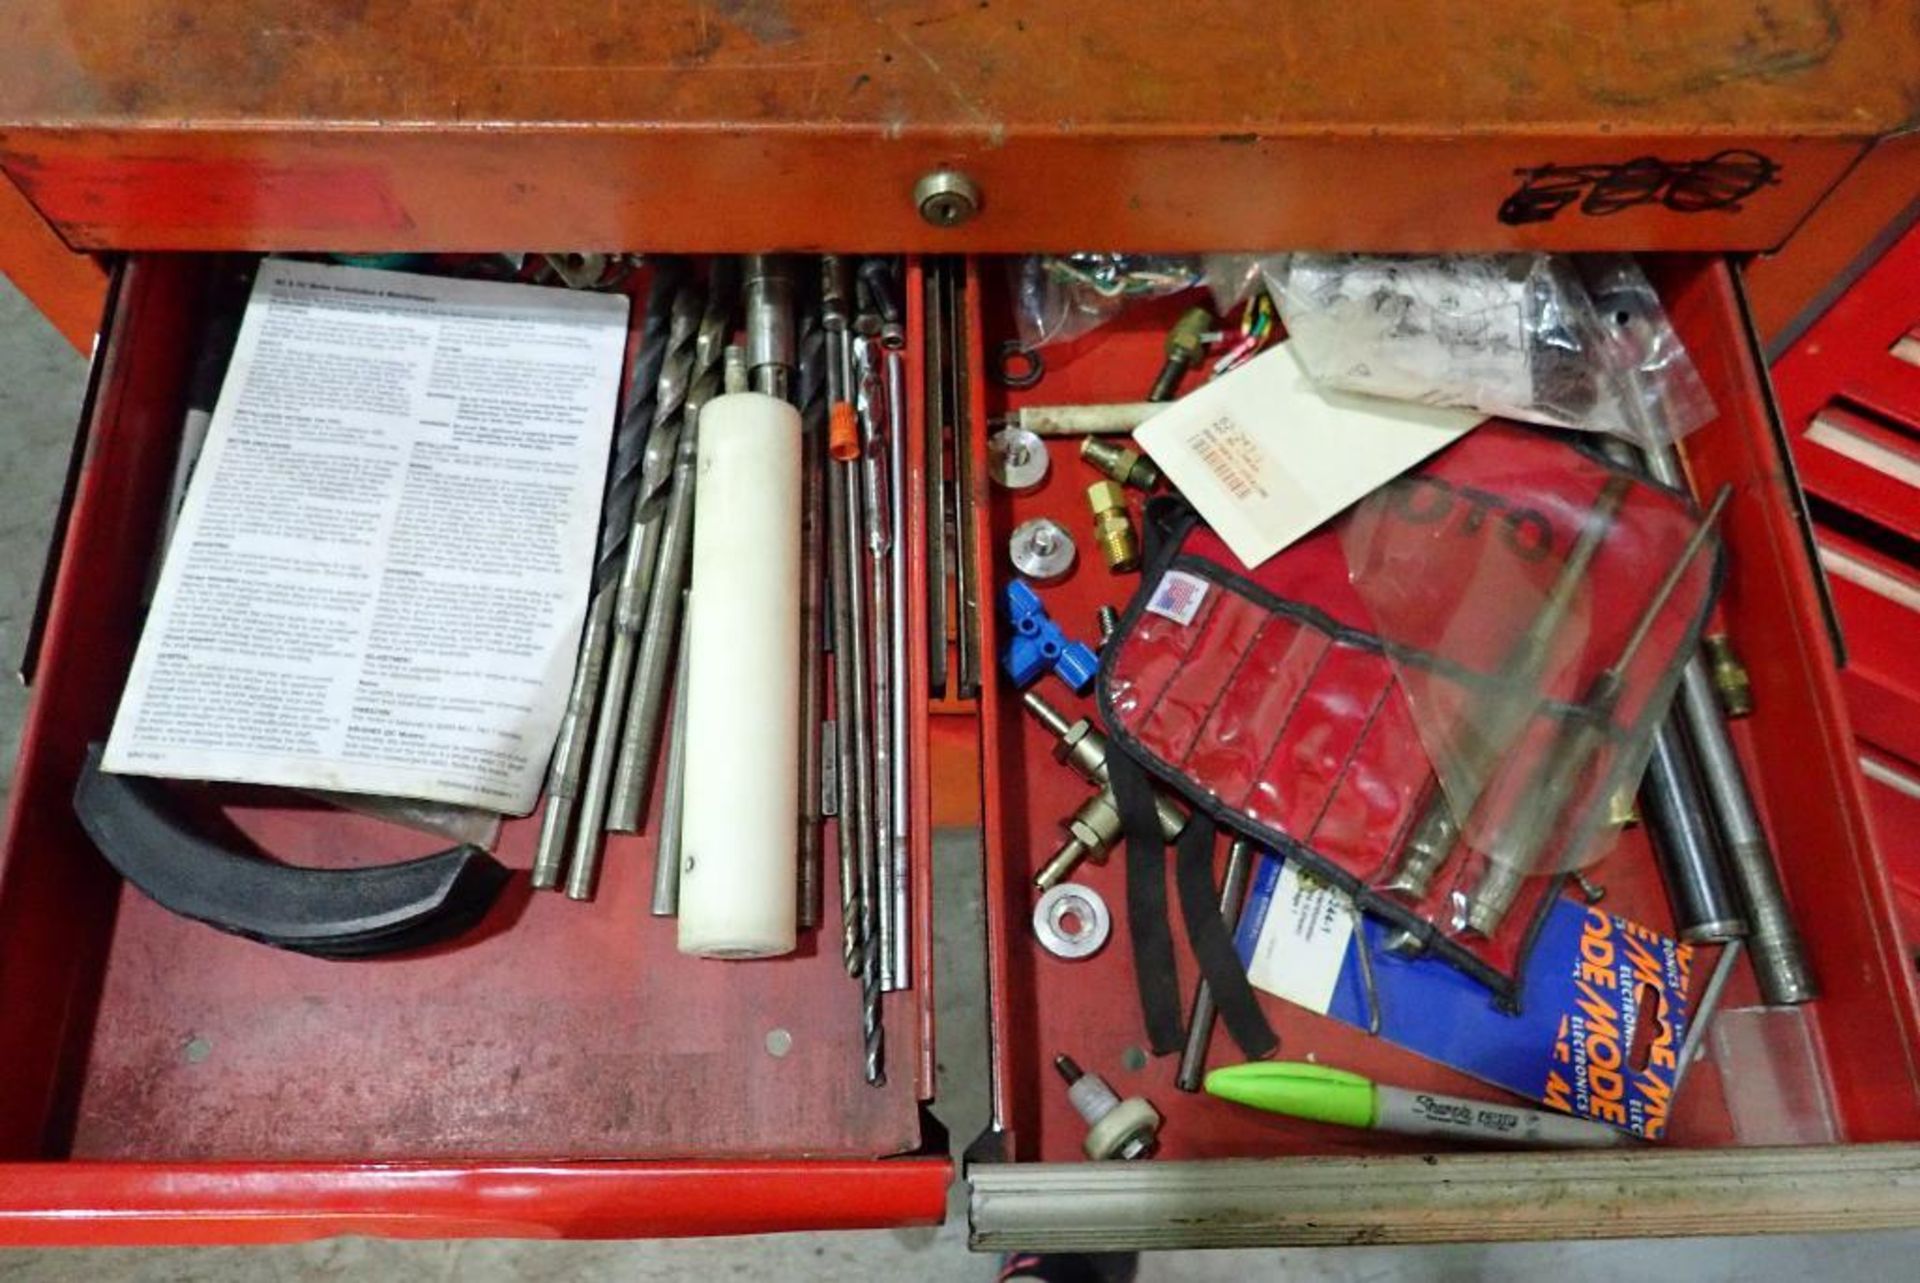 (2) tool chests with contents, wrenches, sockets, drill bits screw drivers, air tools, hammers, plie - Image 24 of 31